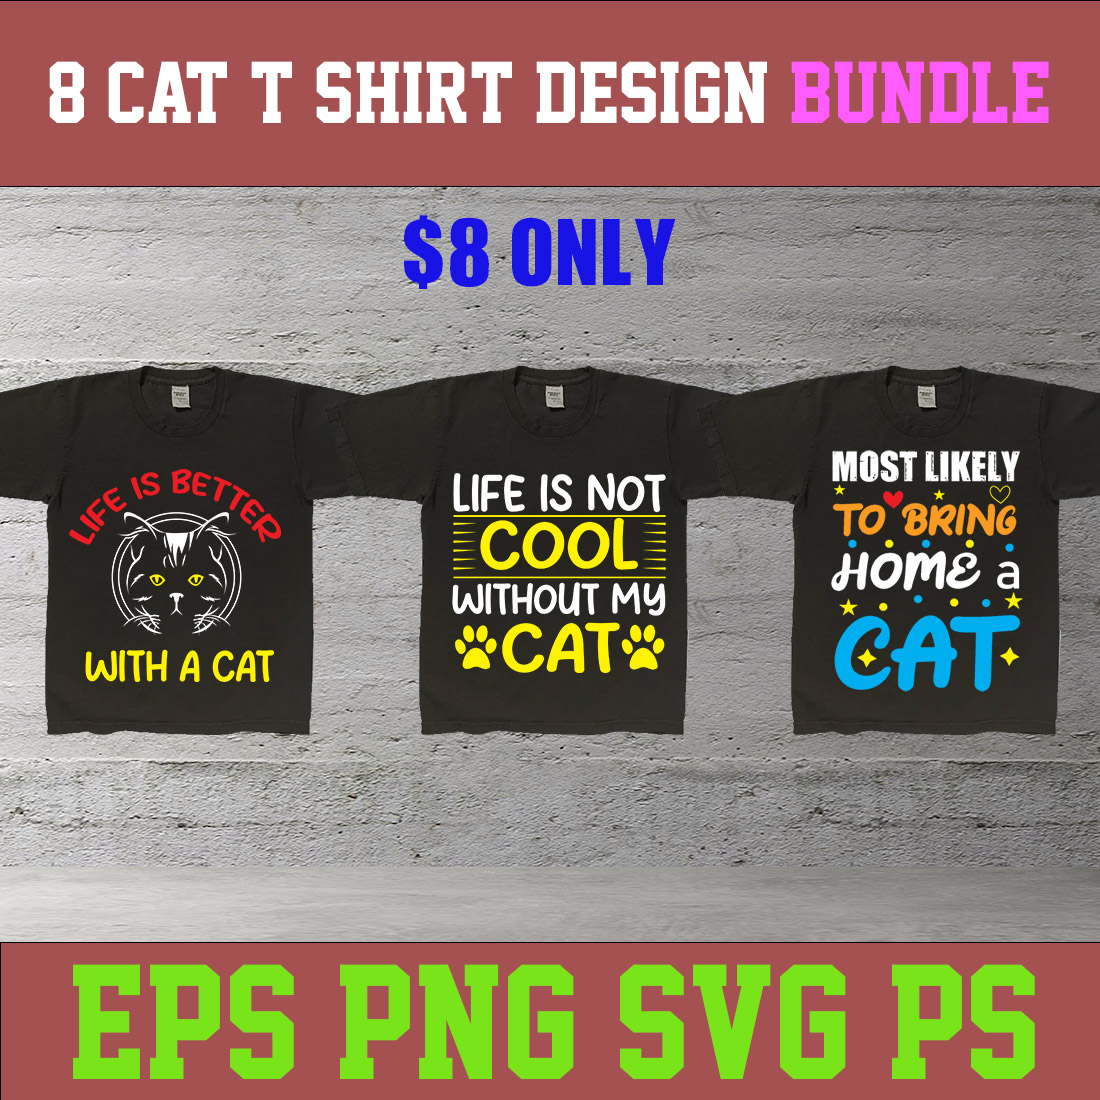 Pack of images of t-shirts with colorful cat prints